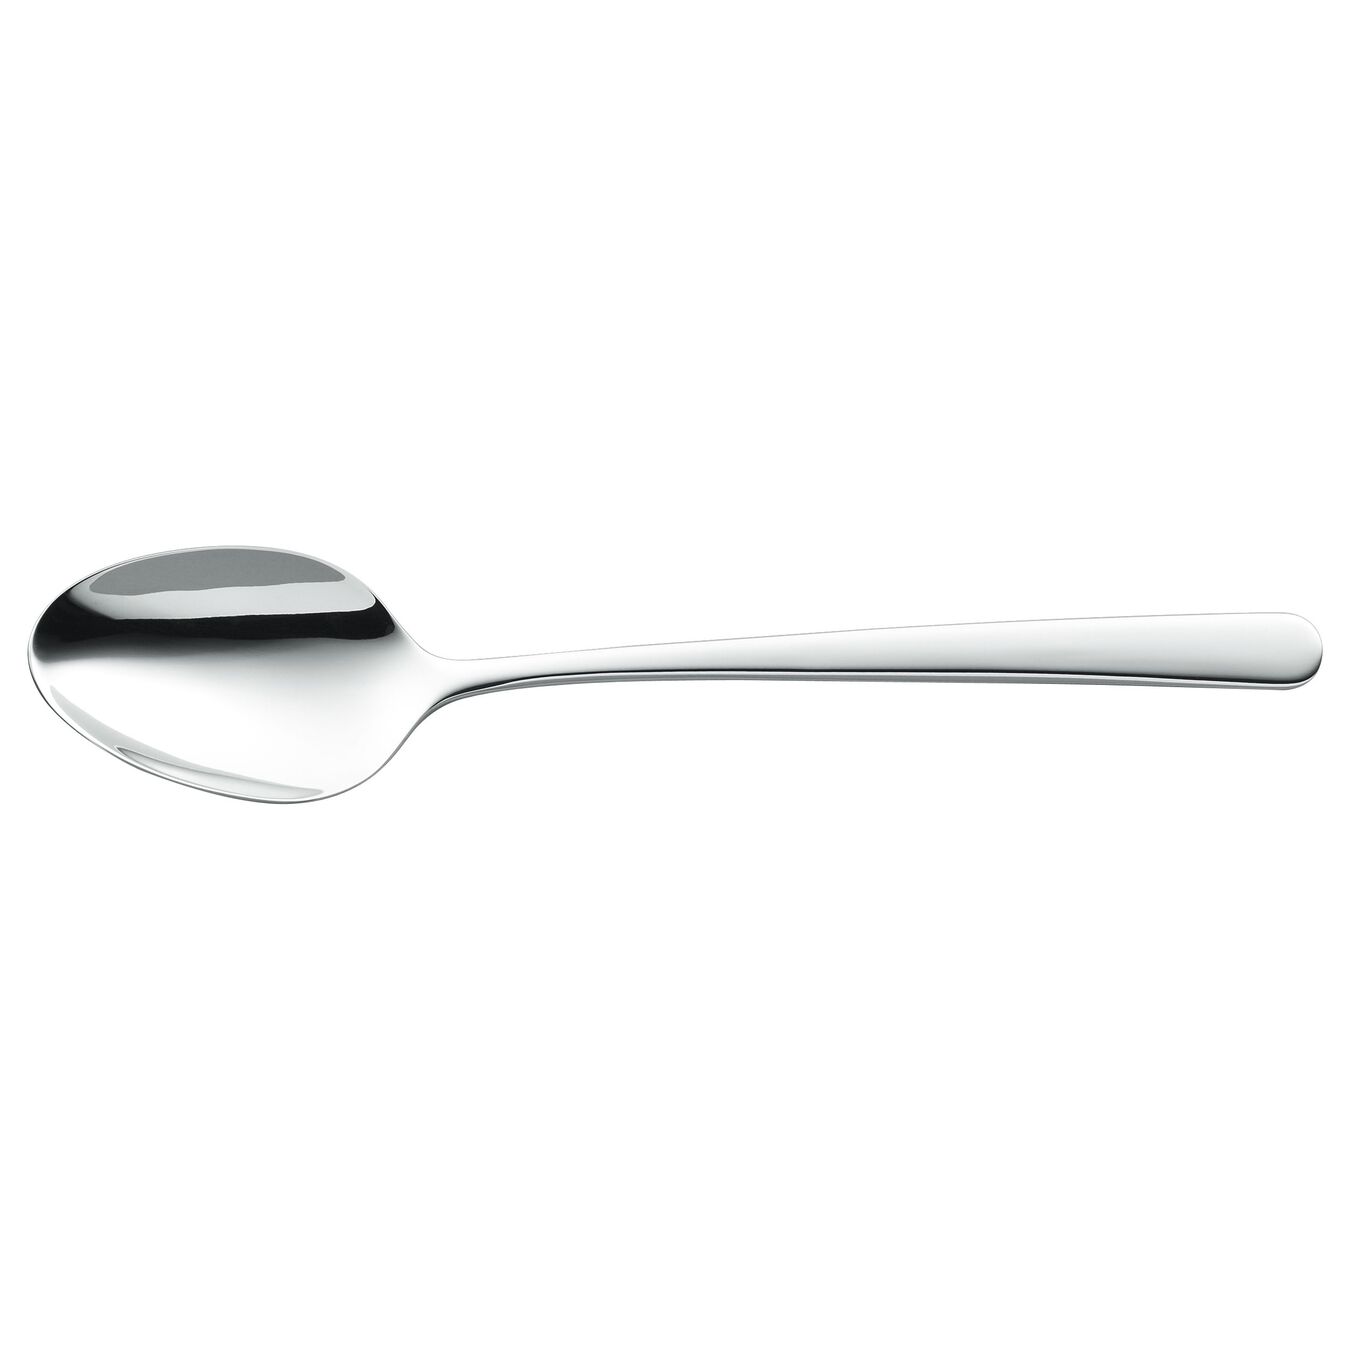 Dinner spoon, silver | polished | 20 cm,,large 2